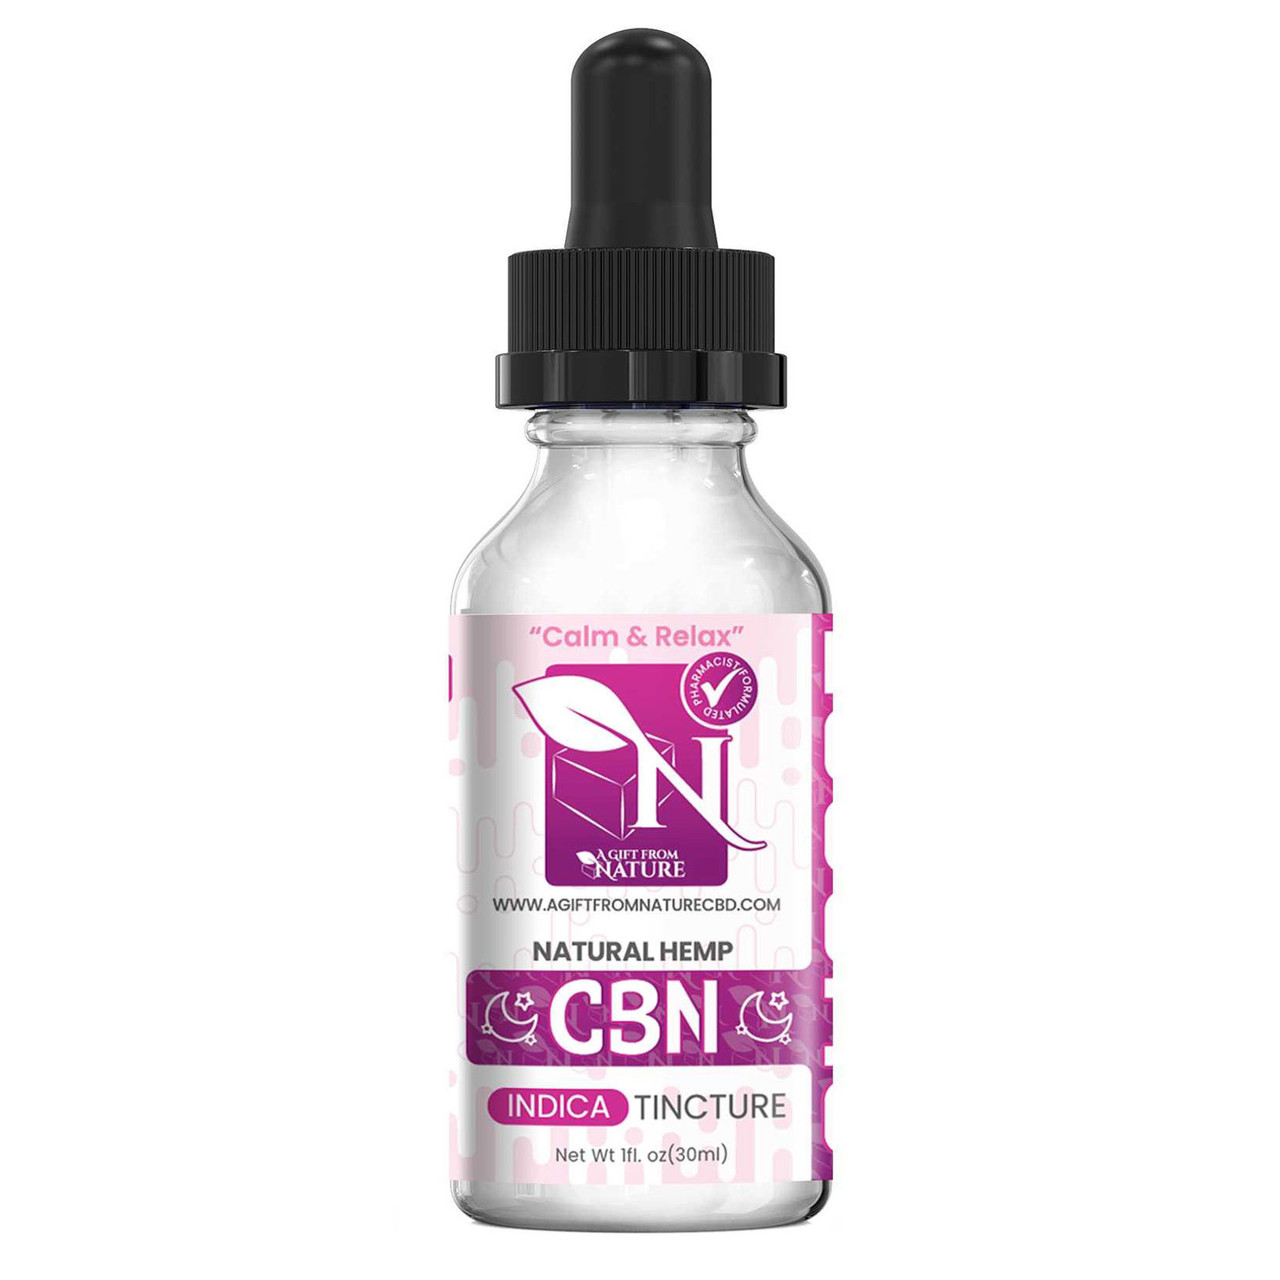 CBN OIL FOR CALM AND RELAXATION - 3000MG - INDICA